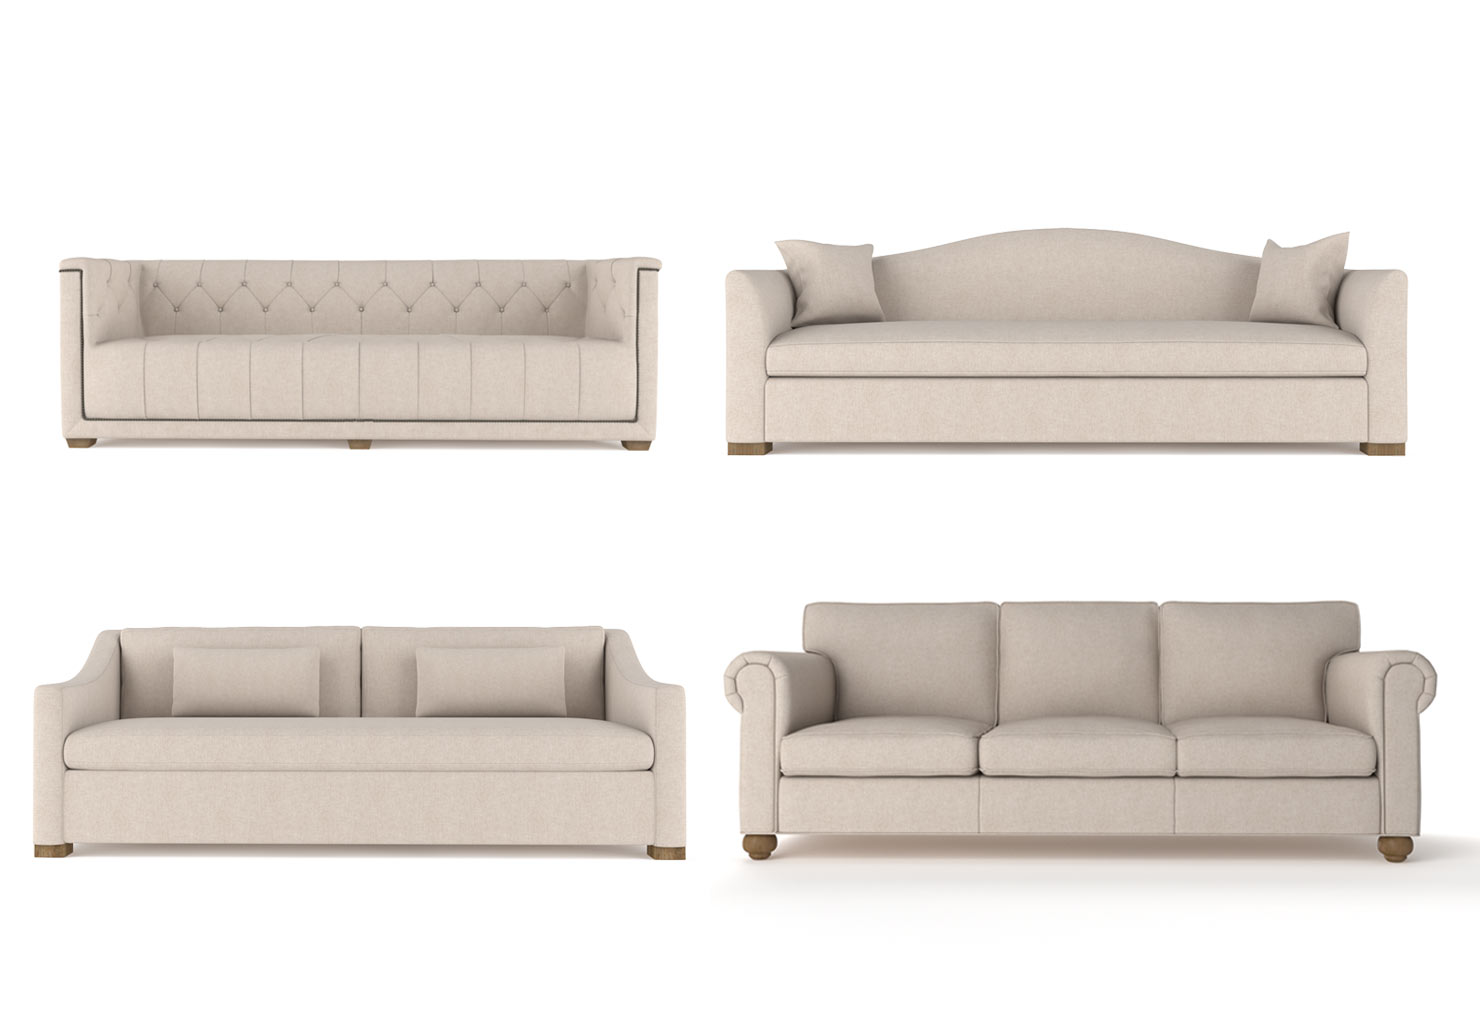 Digital rendering of a contemporary sofa with intricate details, showcasing our 3D furniture modeling expertise